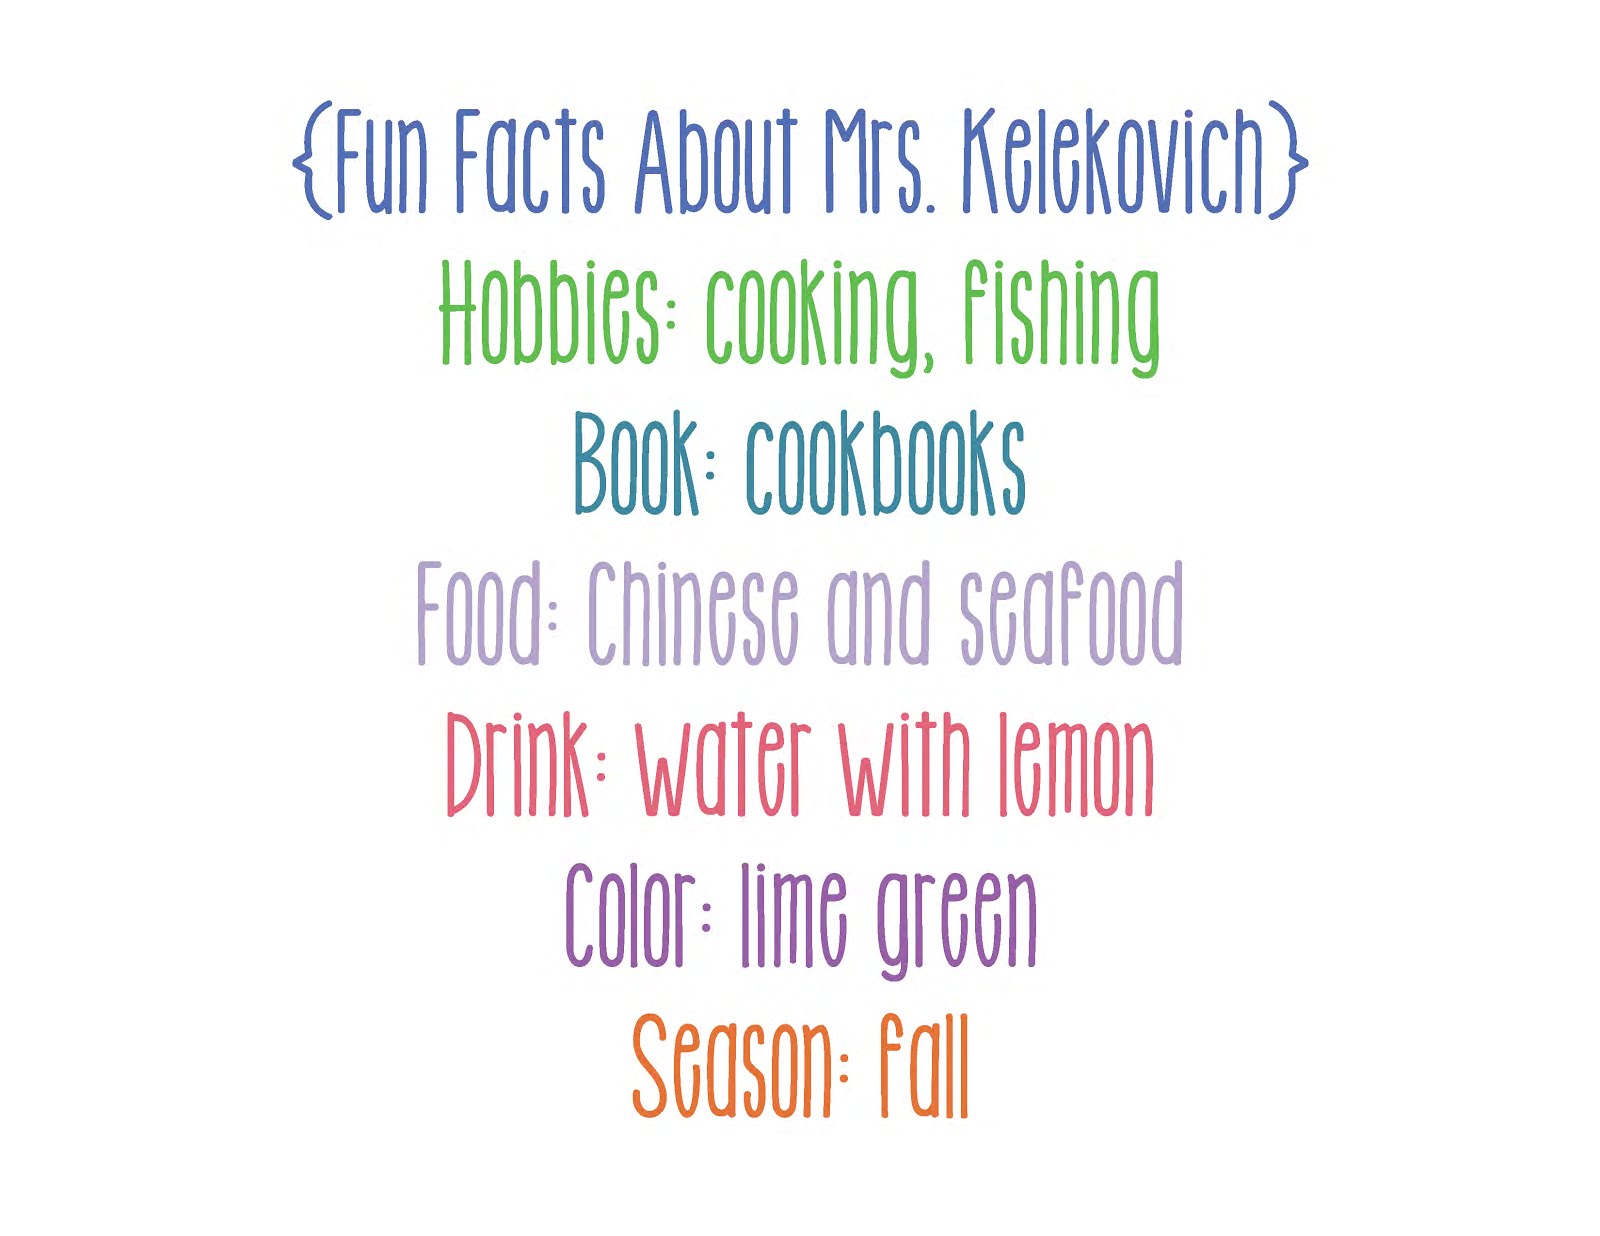 Fun Facts About Mrs. Kelekovich